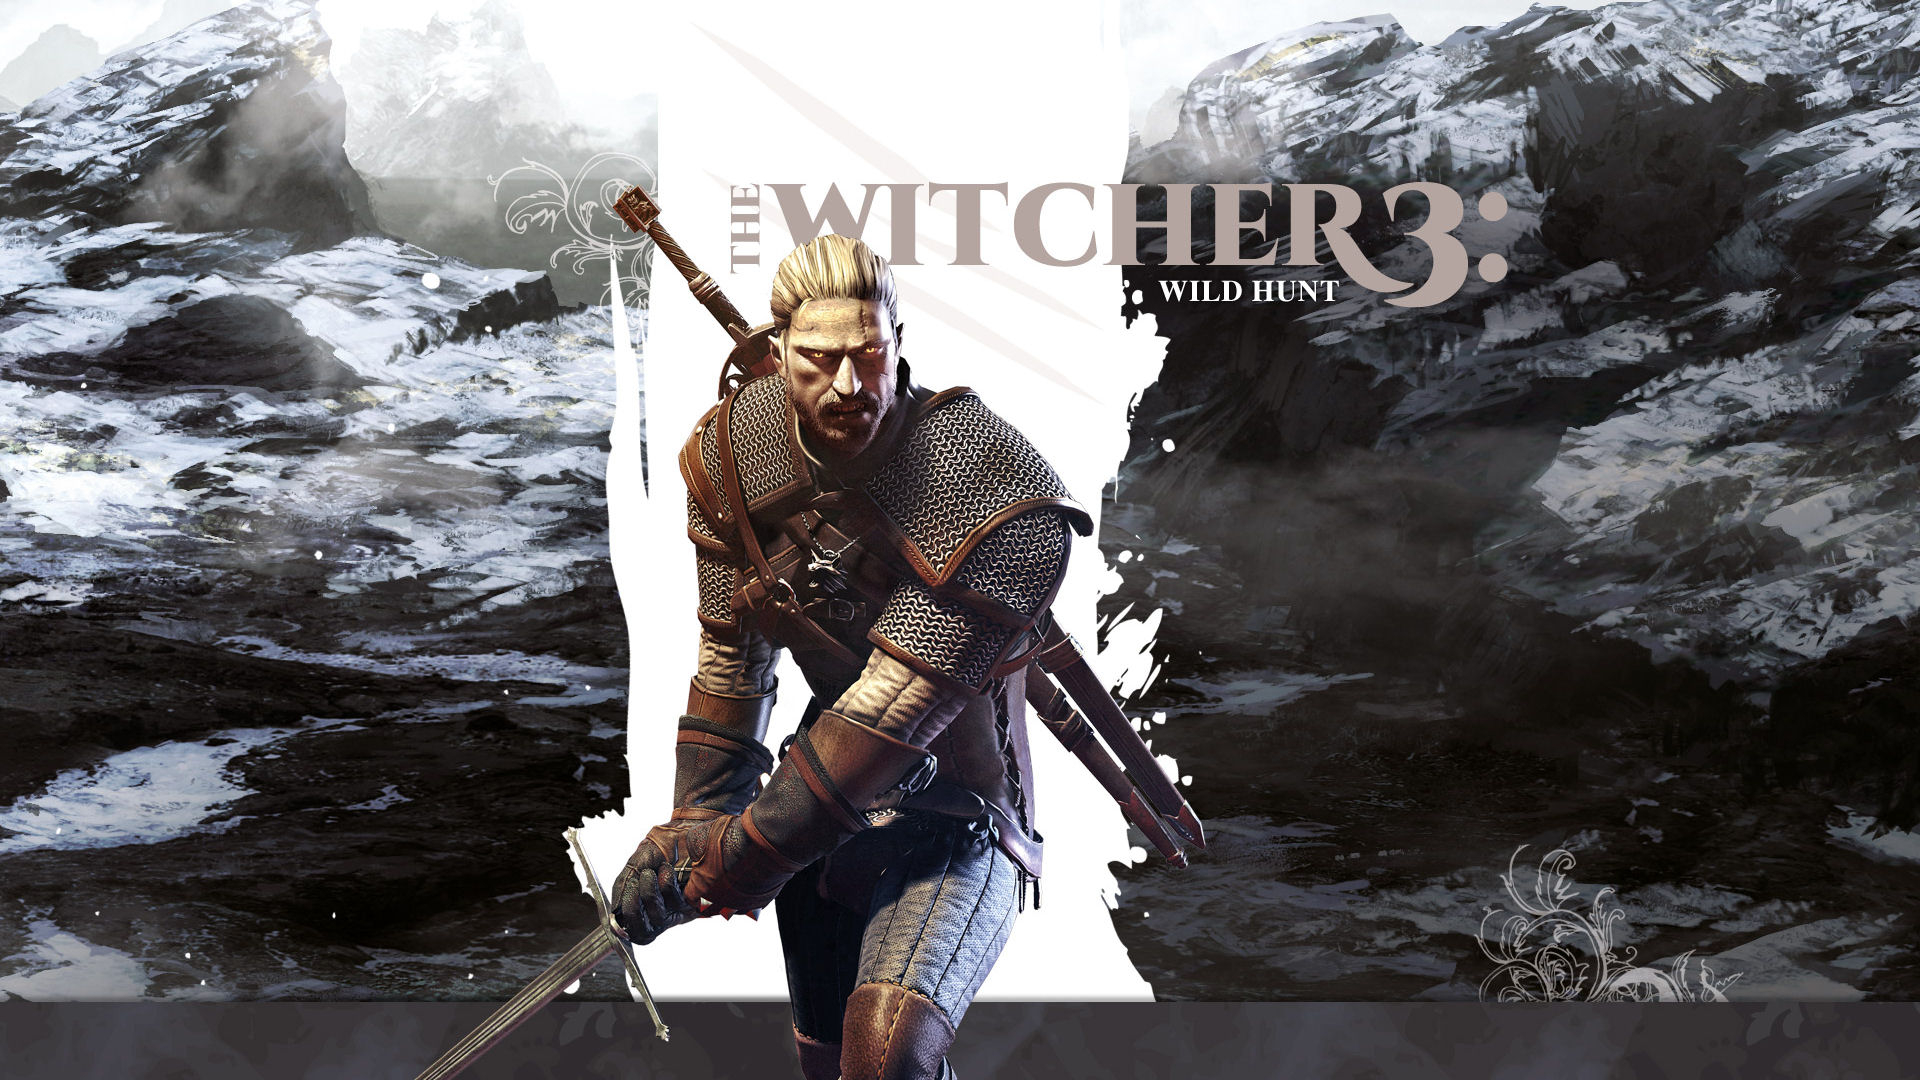 1920x1080 The Witcher 3 Wallpaper (HD) Video Games Blogger